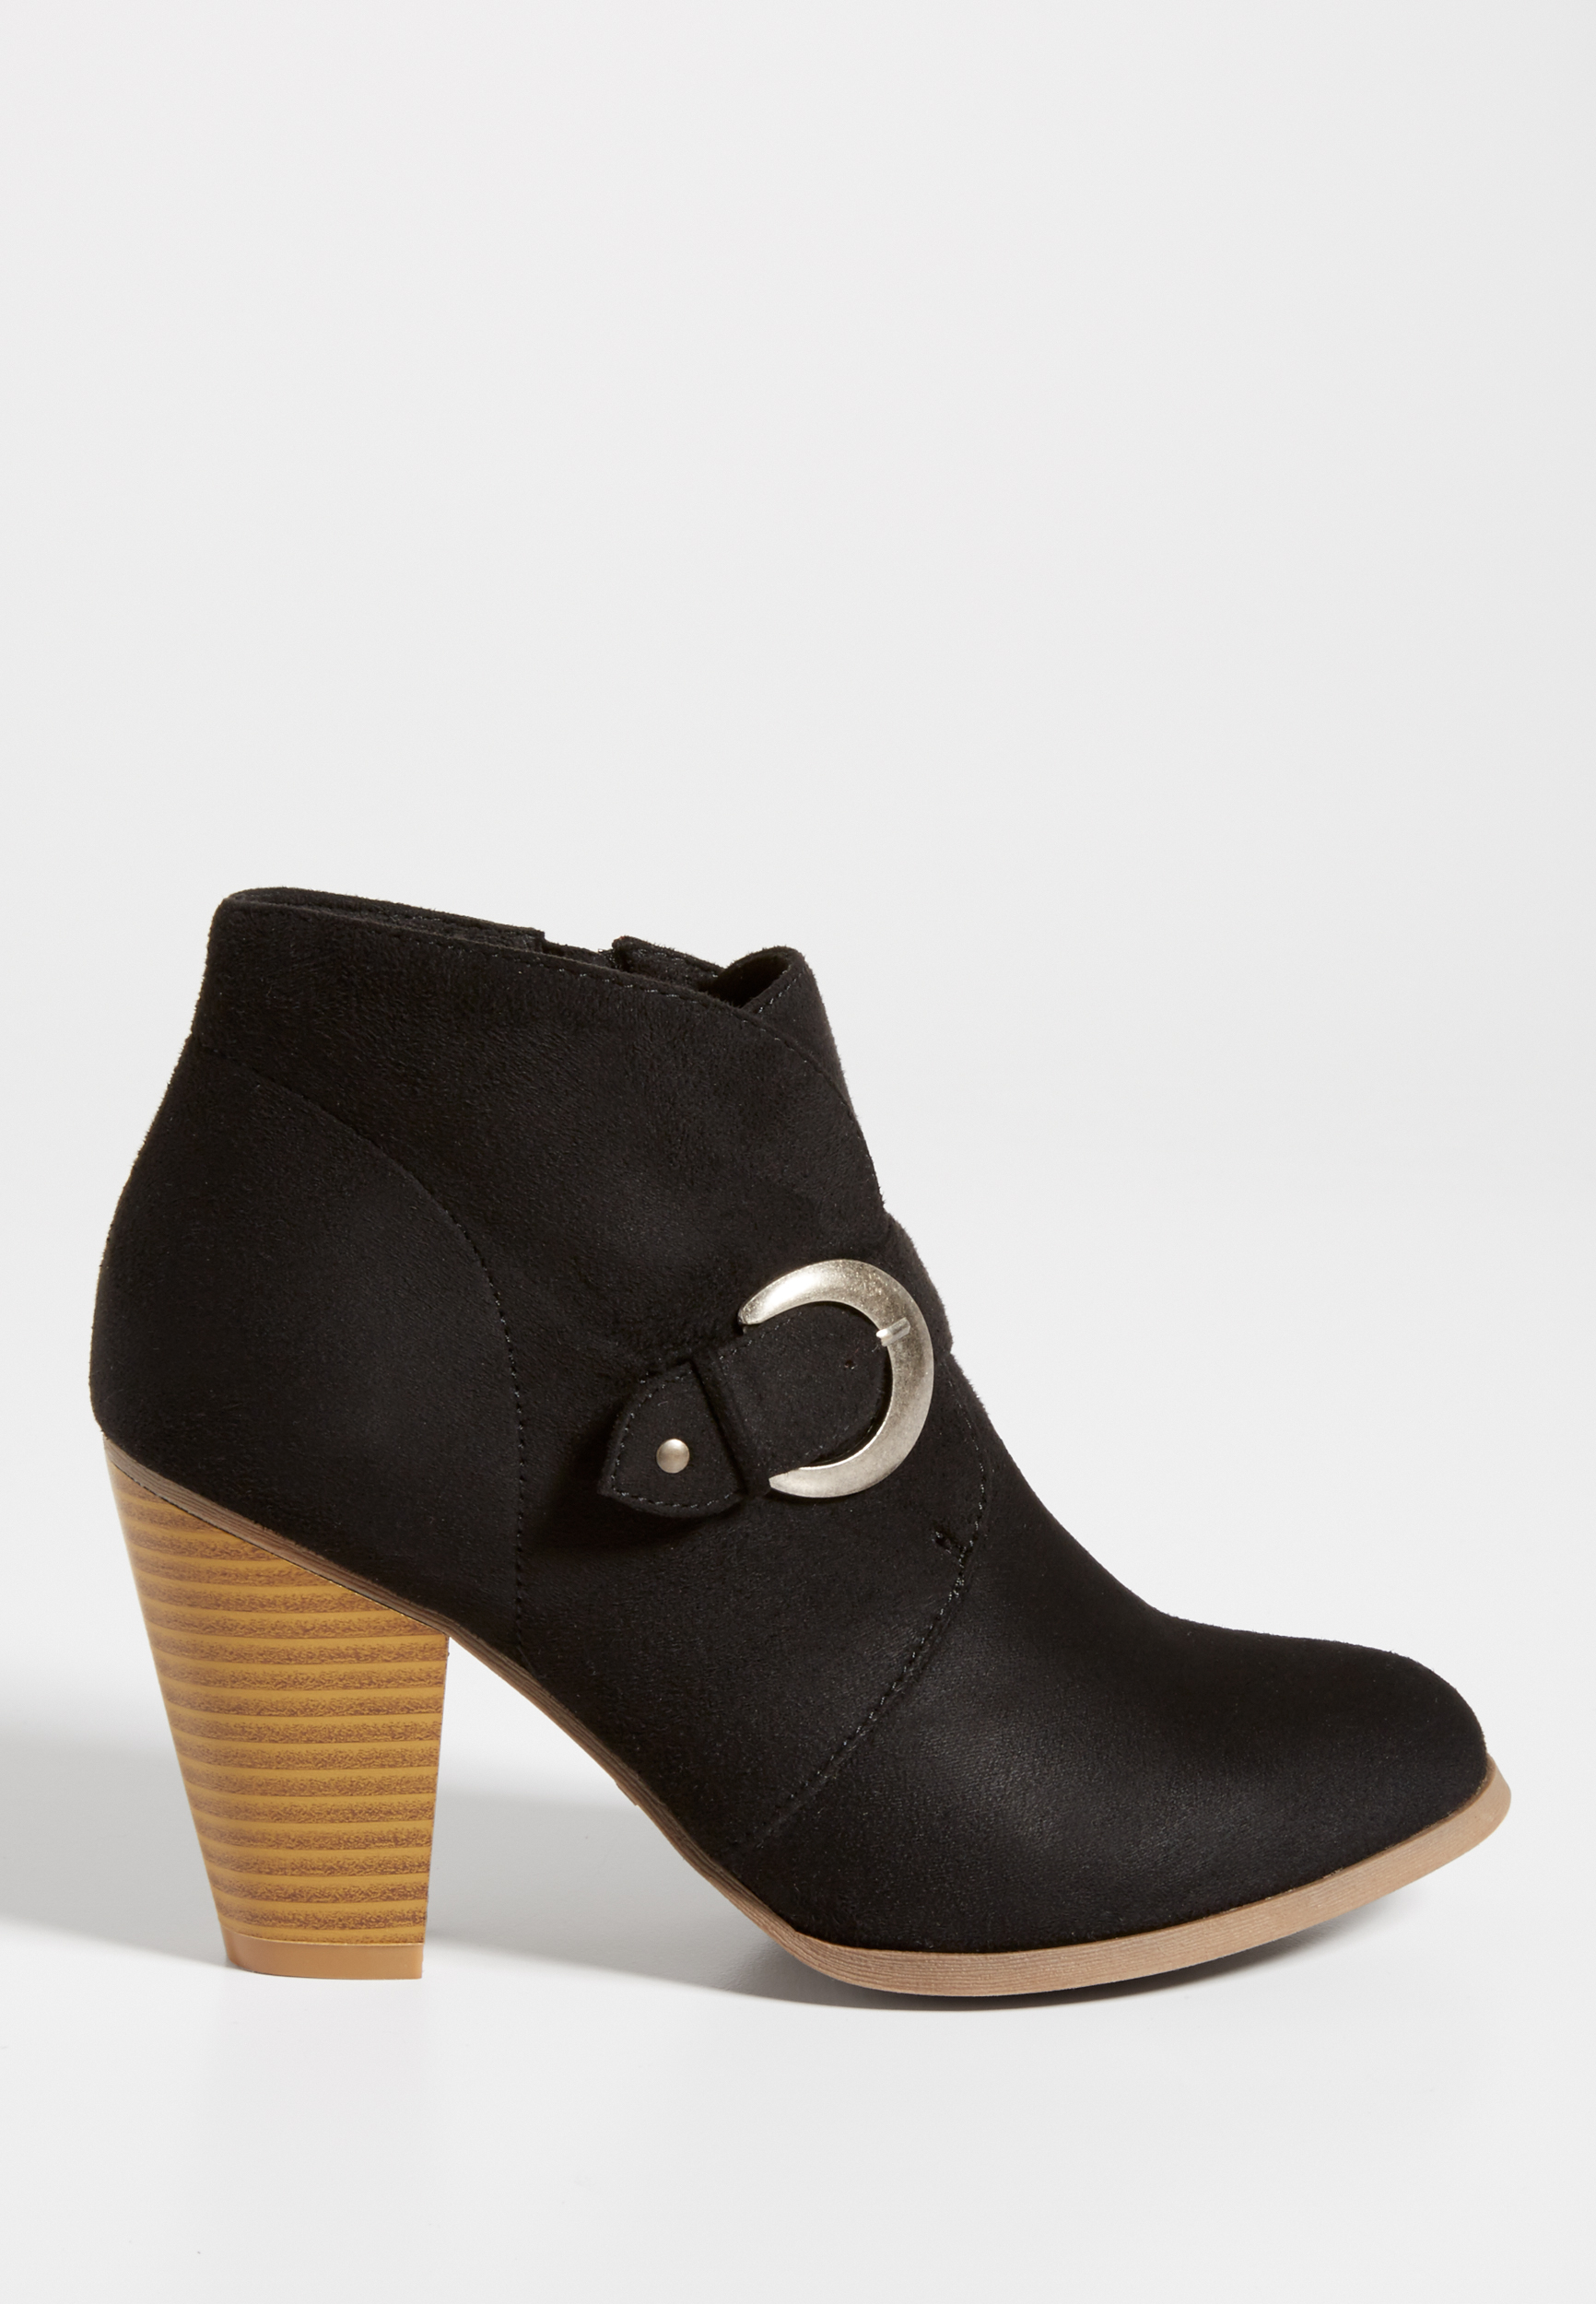 Trina faux suede heeled bootie with buckle | maurices